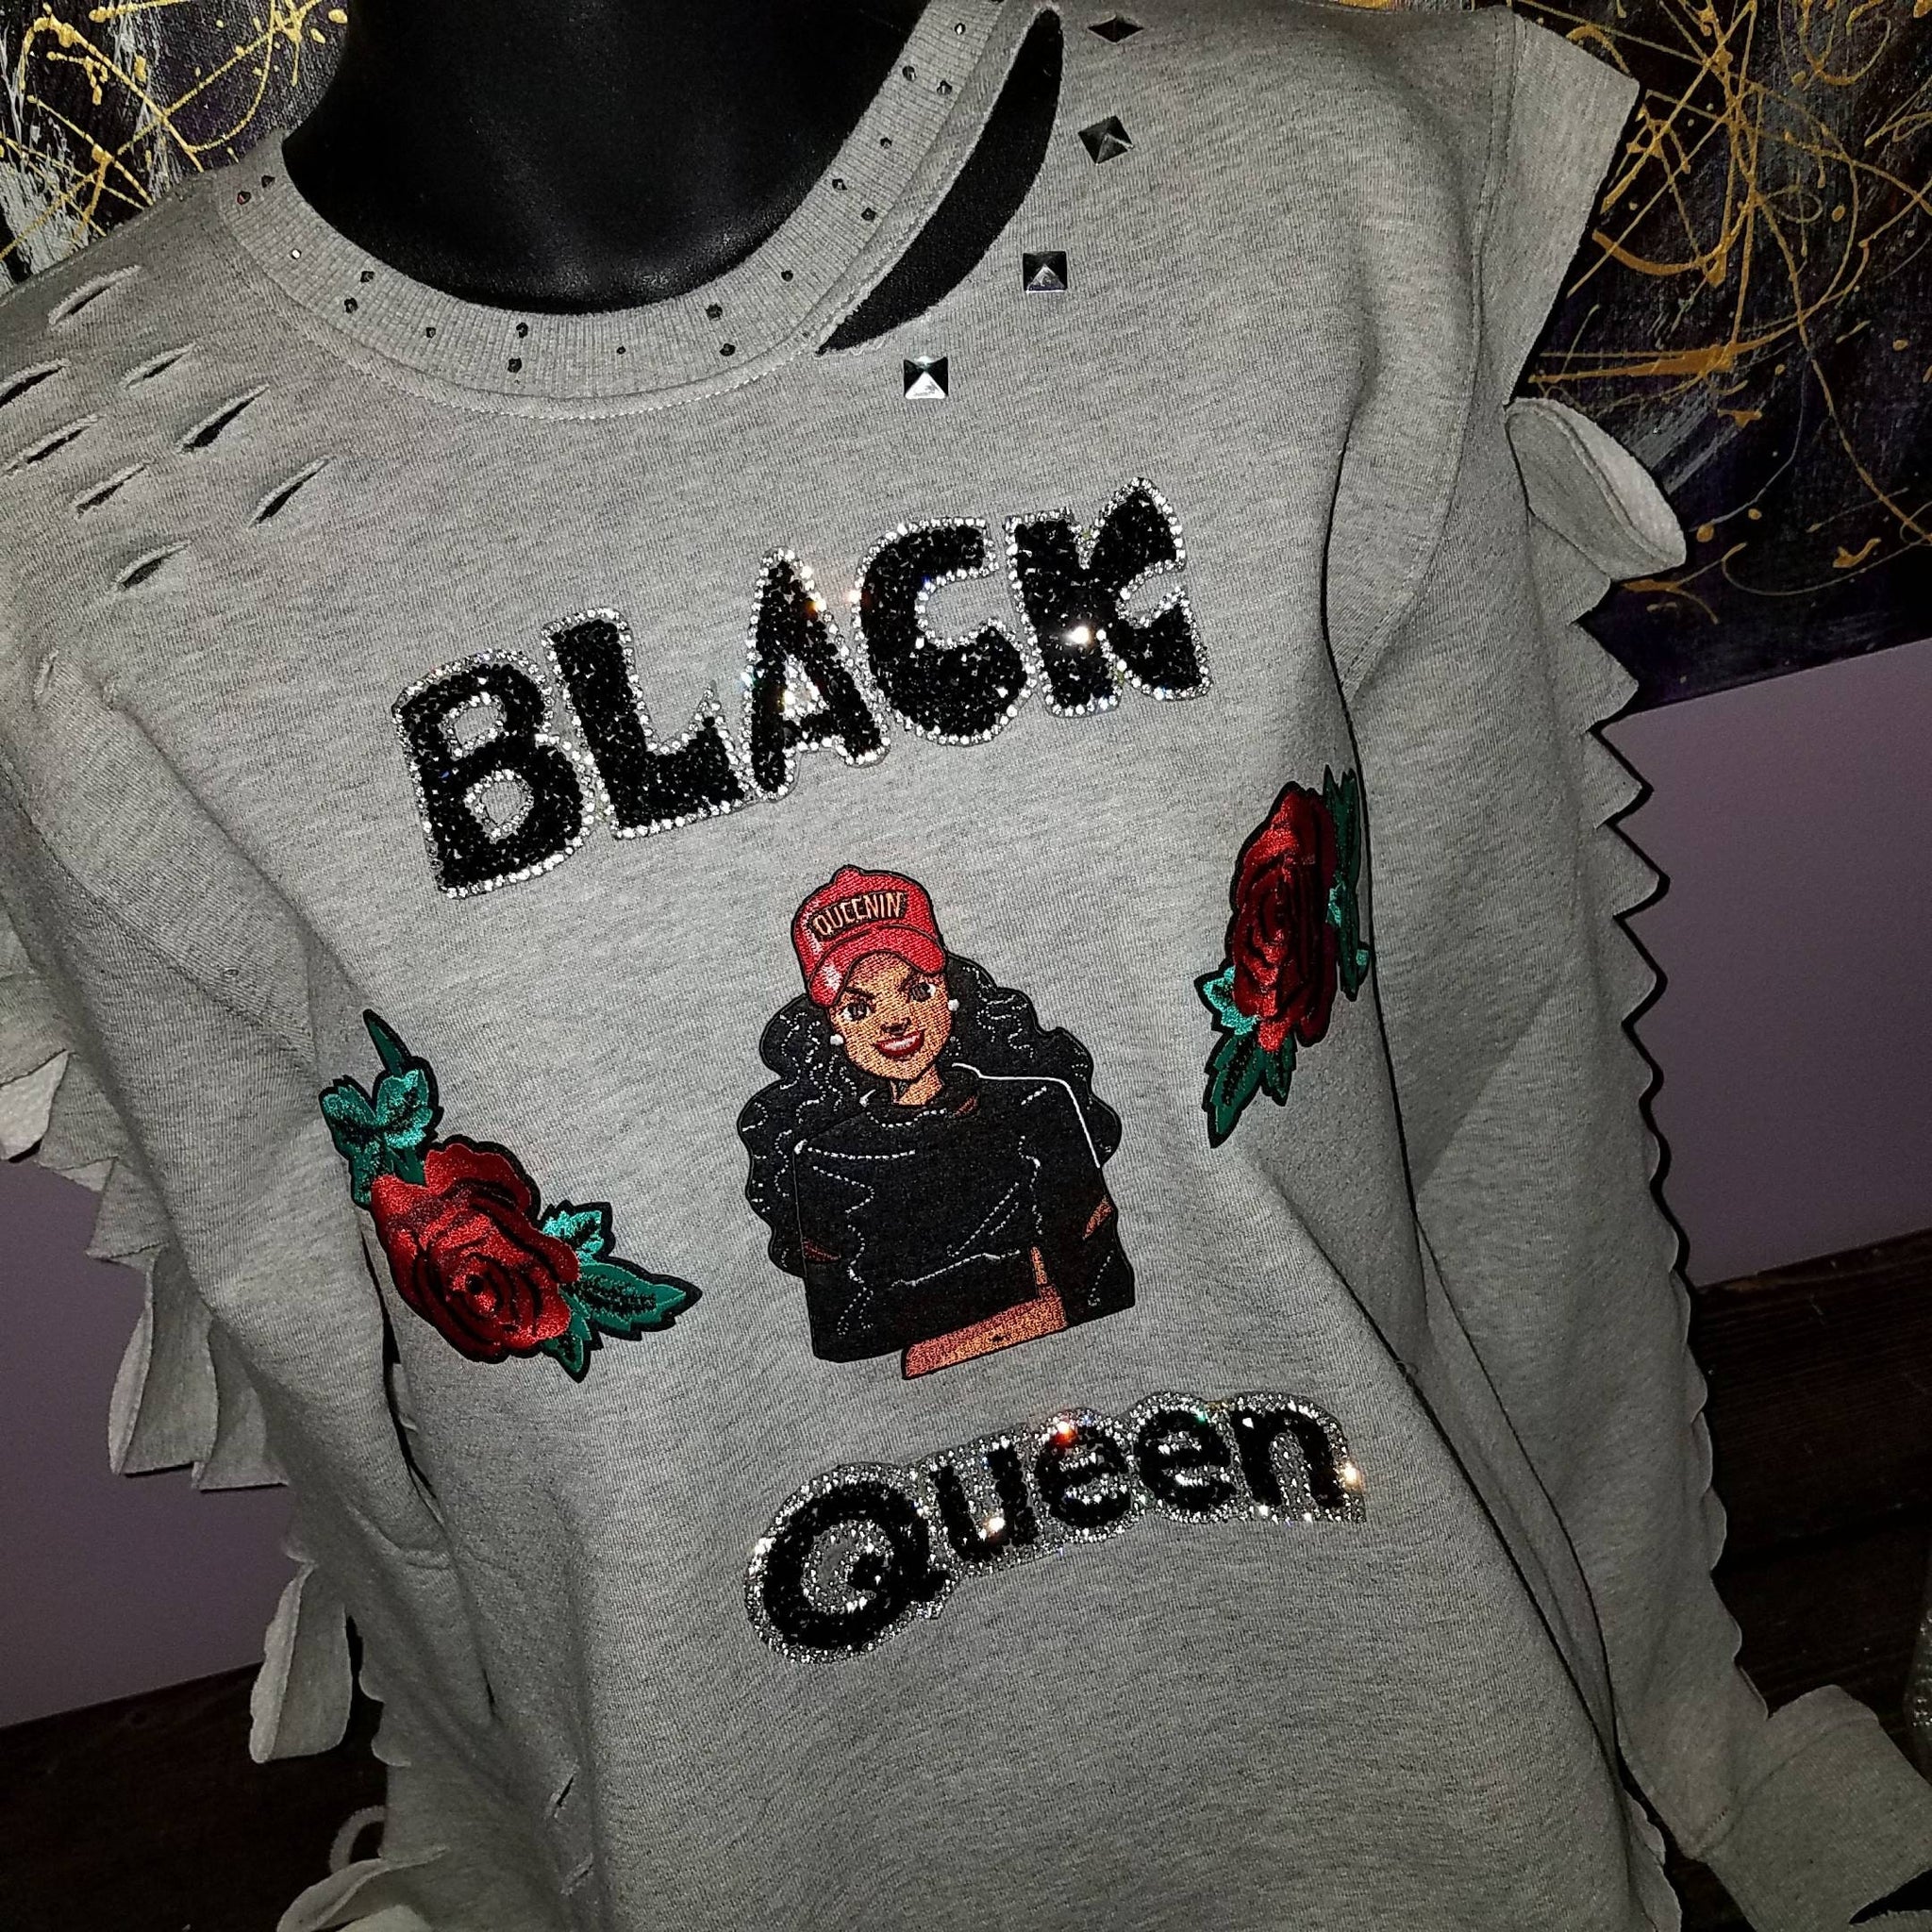 Exclusive Red Hat "Queenin" Iron-on Patch, 100% Embroidered Afrocentric Patch| Beautiful Black Queen|Jacket Patch|DIY Applique| Size 5"